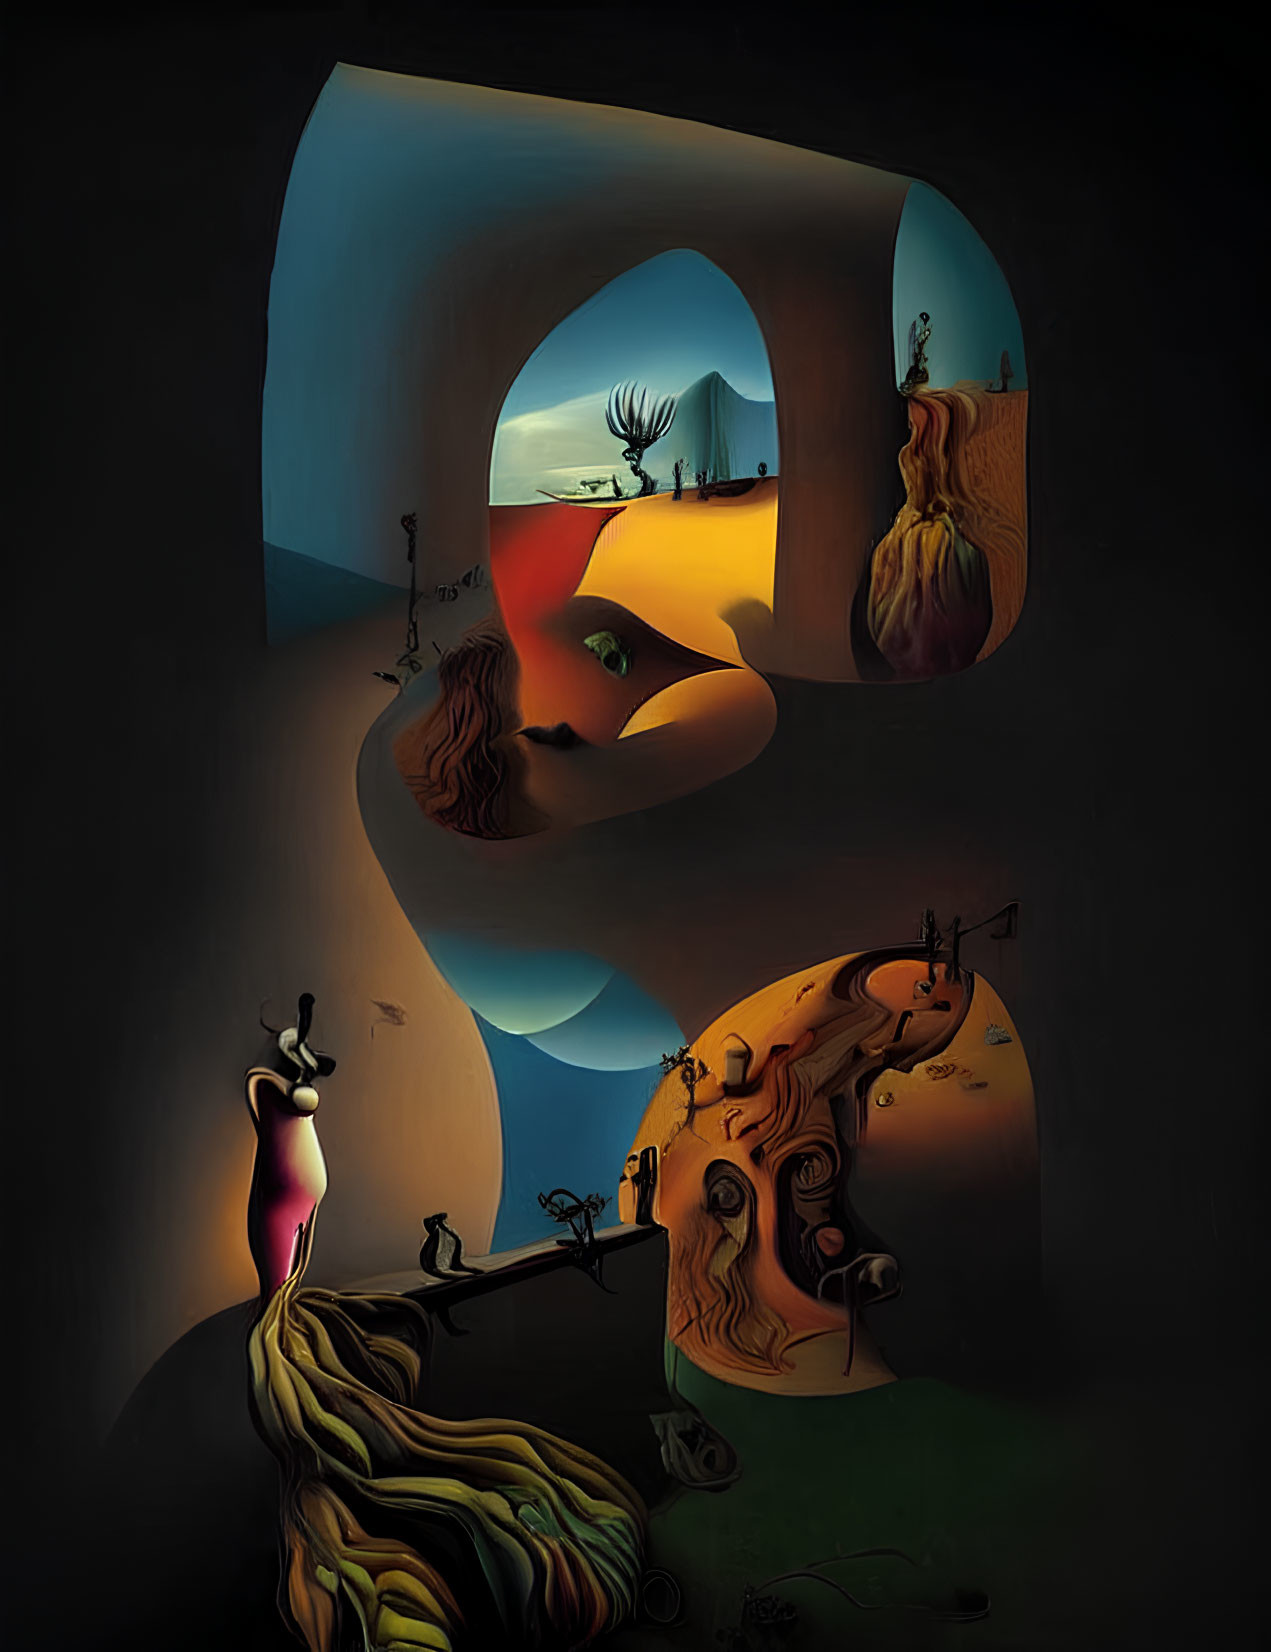 Surreal desert landscape with twisted shapes and melting clocks